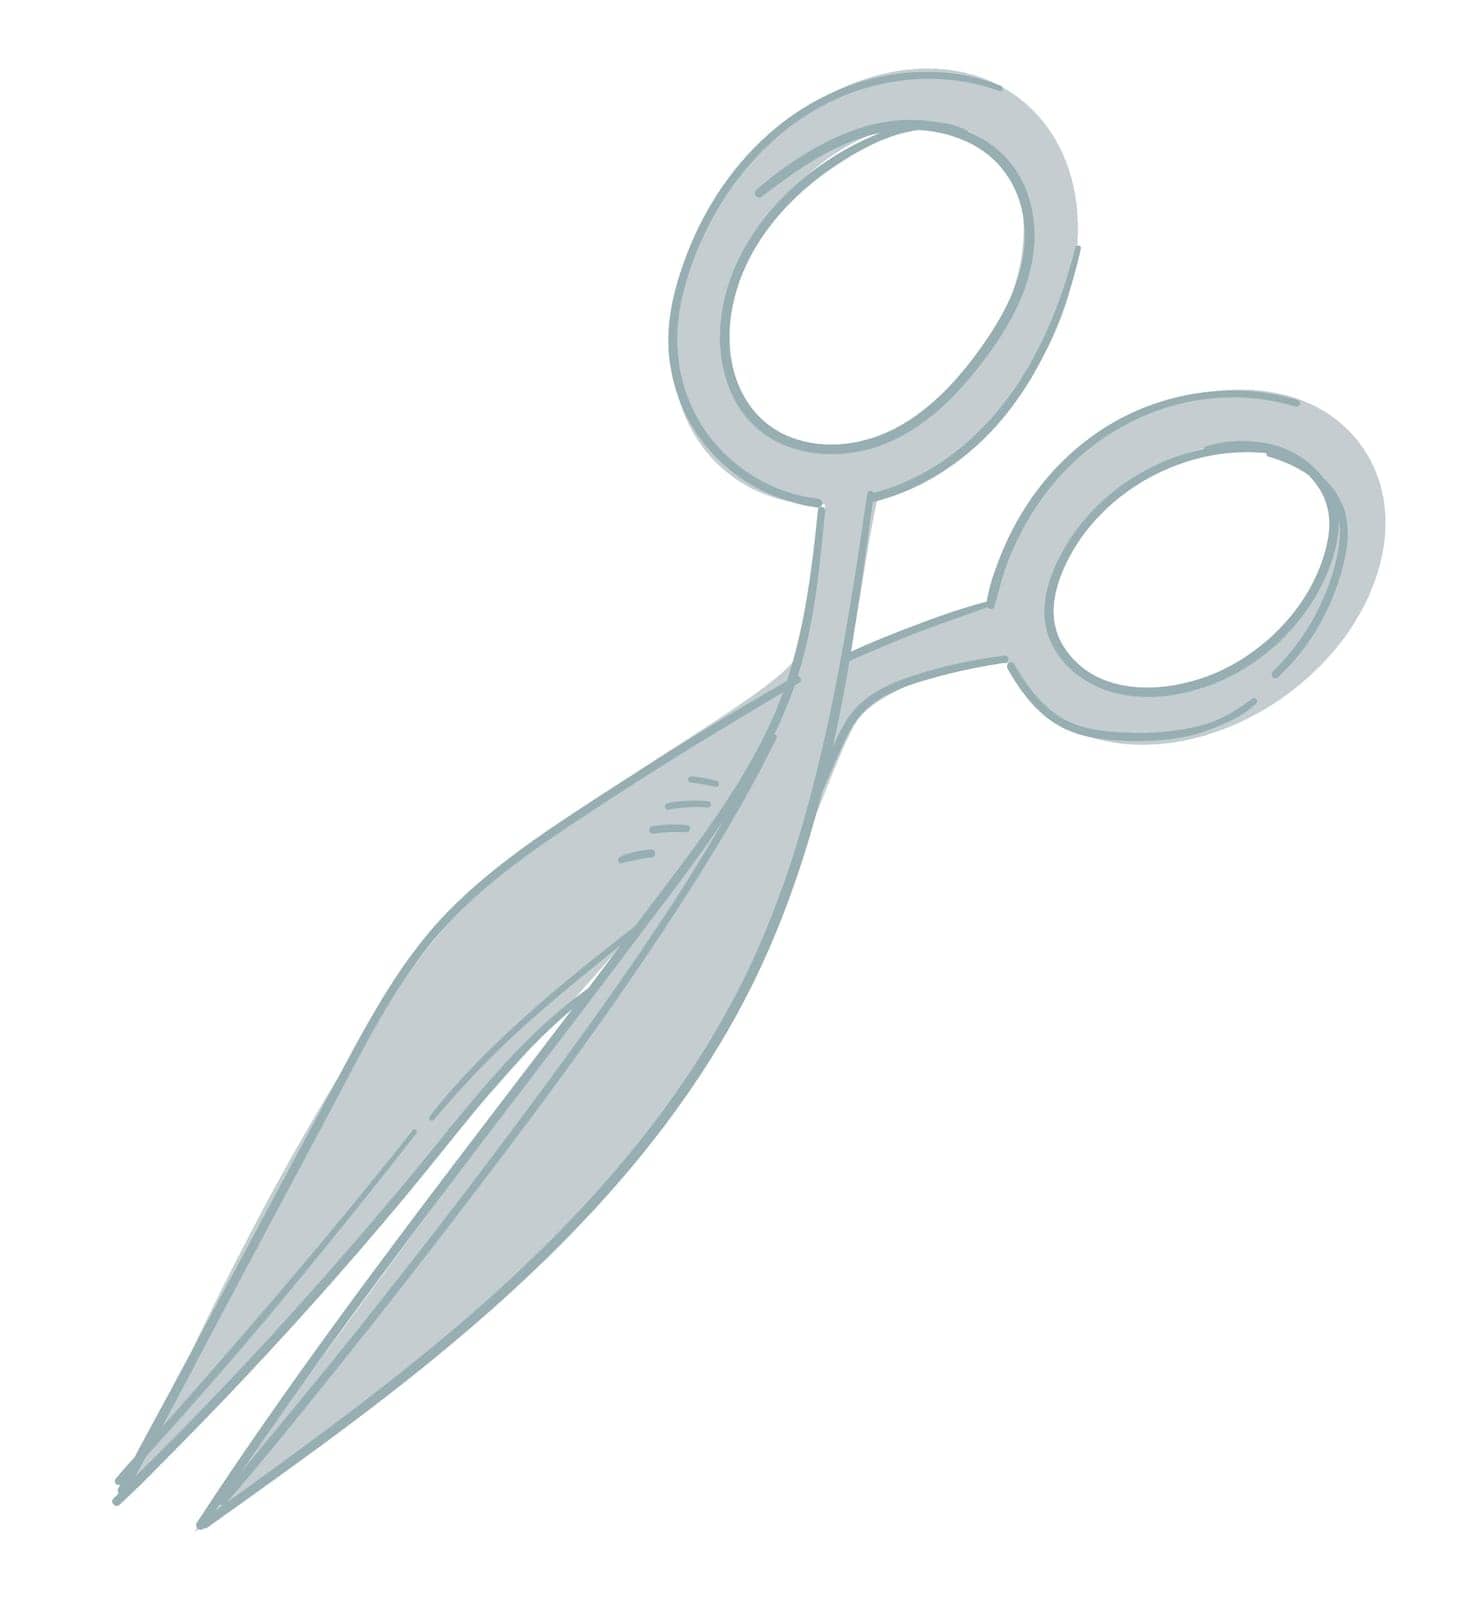 Scissors for cutting in half, sharp blade of tool by Sonulkaster